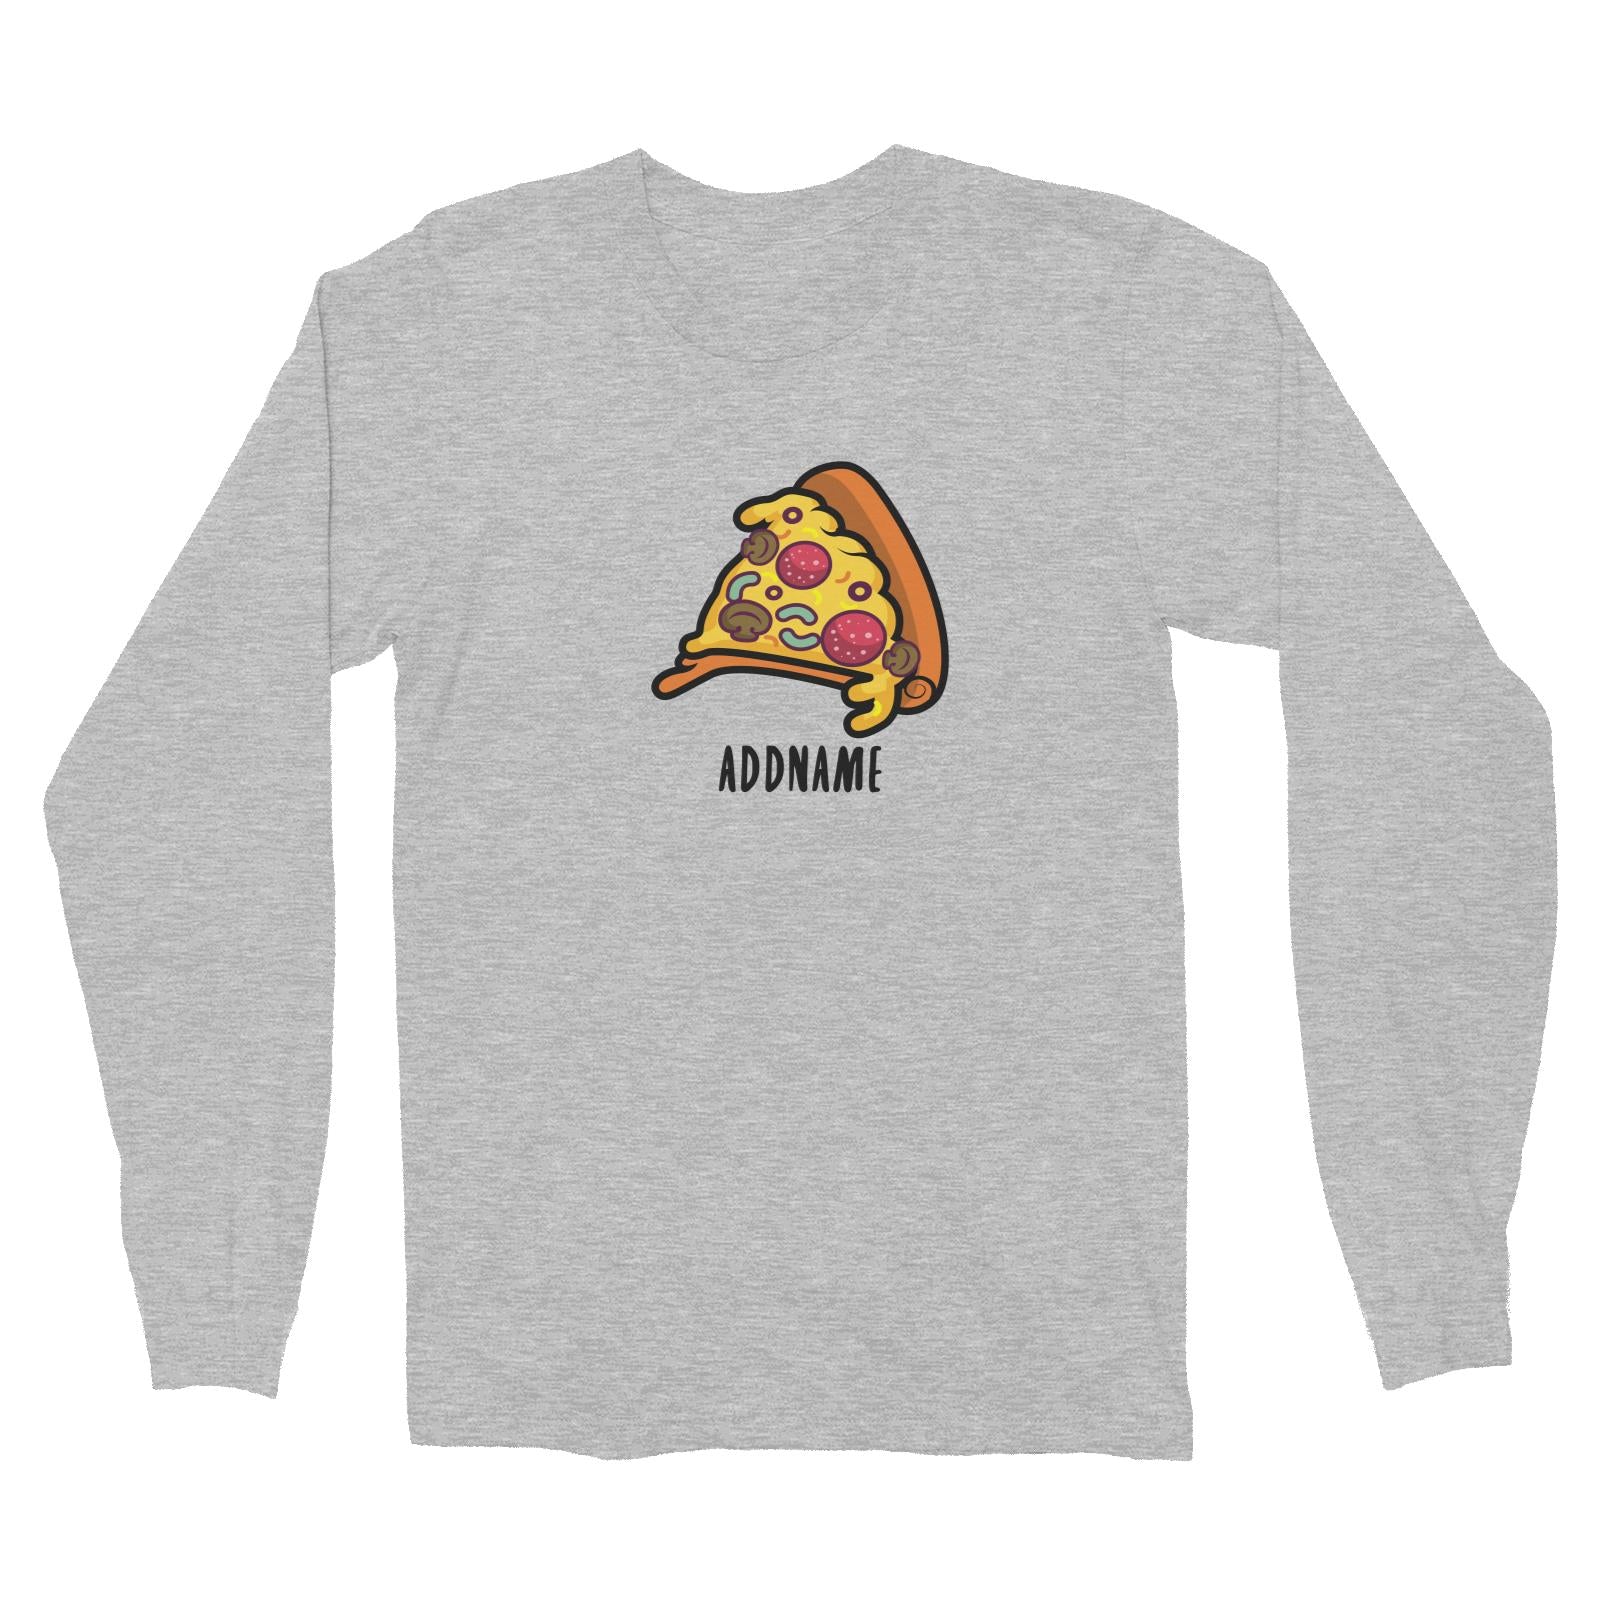 Fast Food Pizza Slice Addname Long Sleeve Unisex T-Shirt  Matching Family Comic Cartoon Personalizable Designs